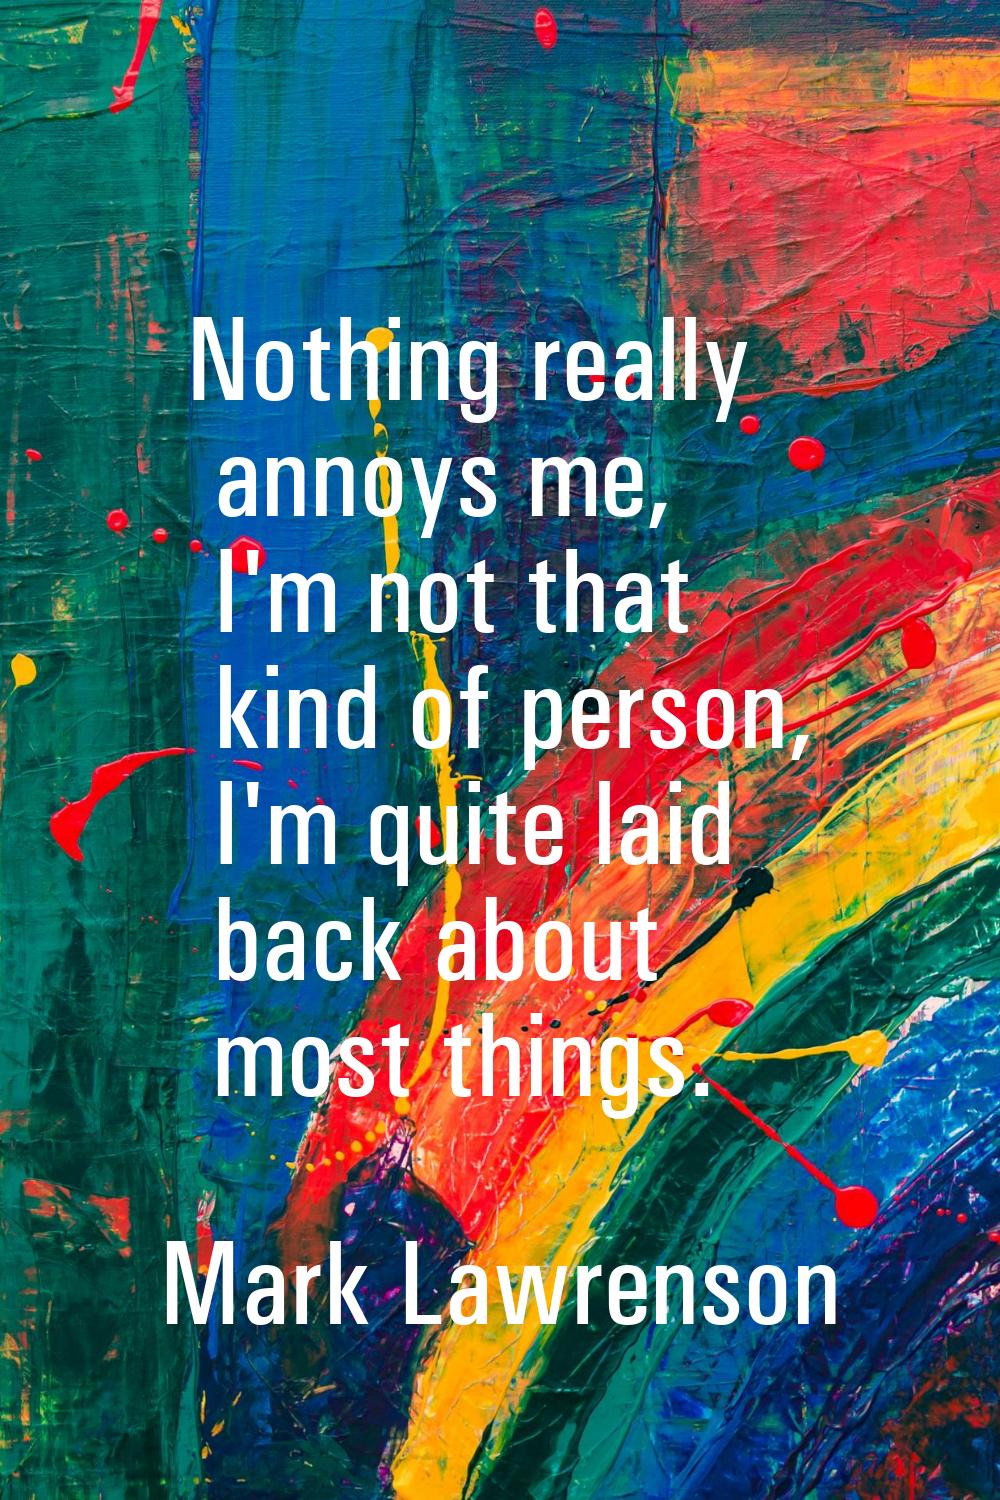 Nothing really annoys me, I'm not that kind of person, I'm quite laid back about most things.